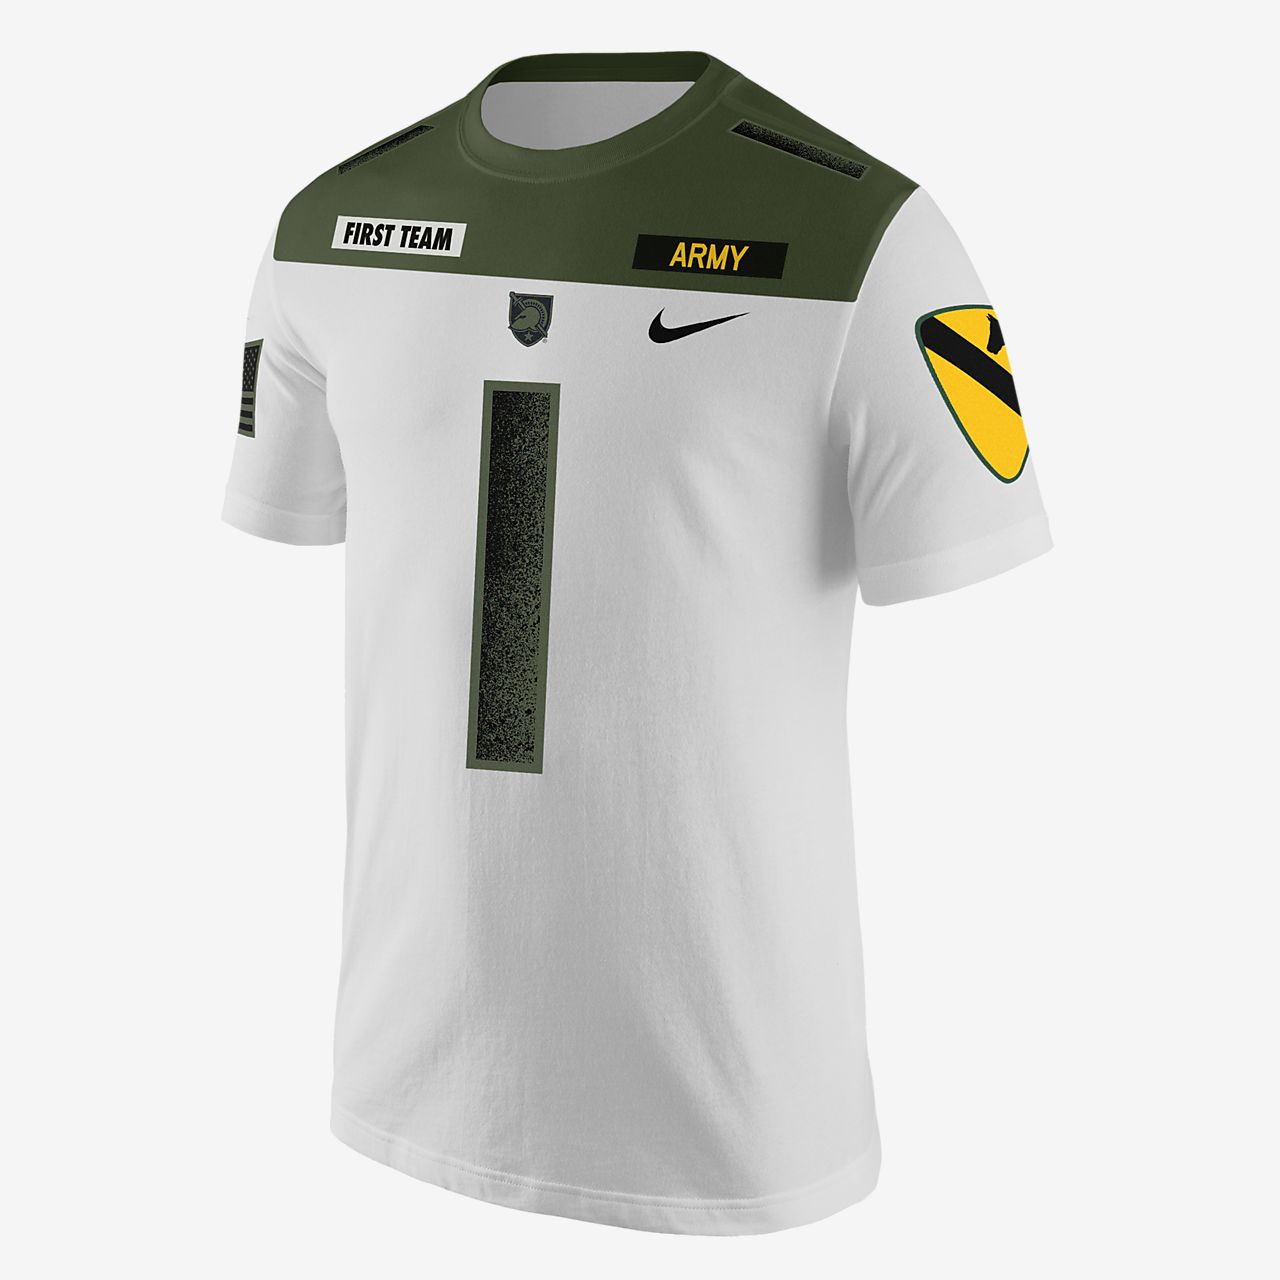 nike t shirt army new style 7fc99 5a69c